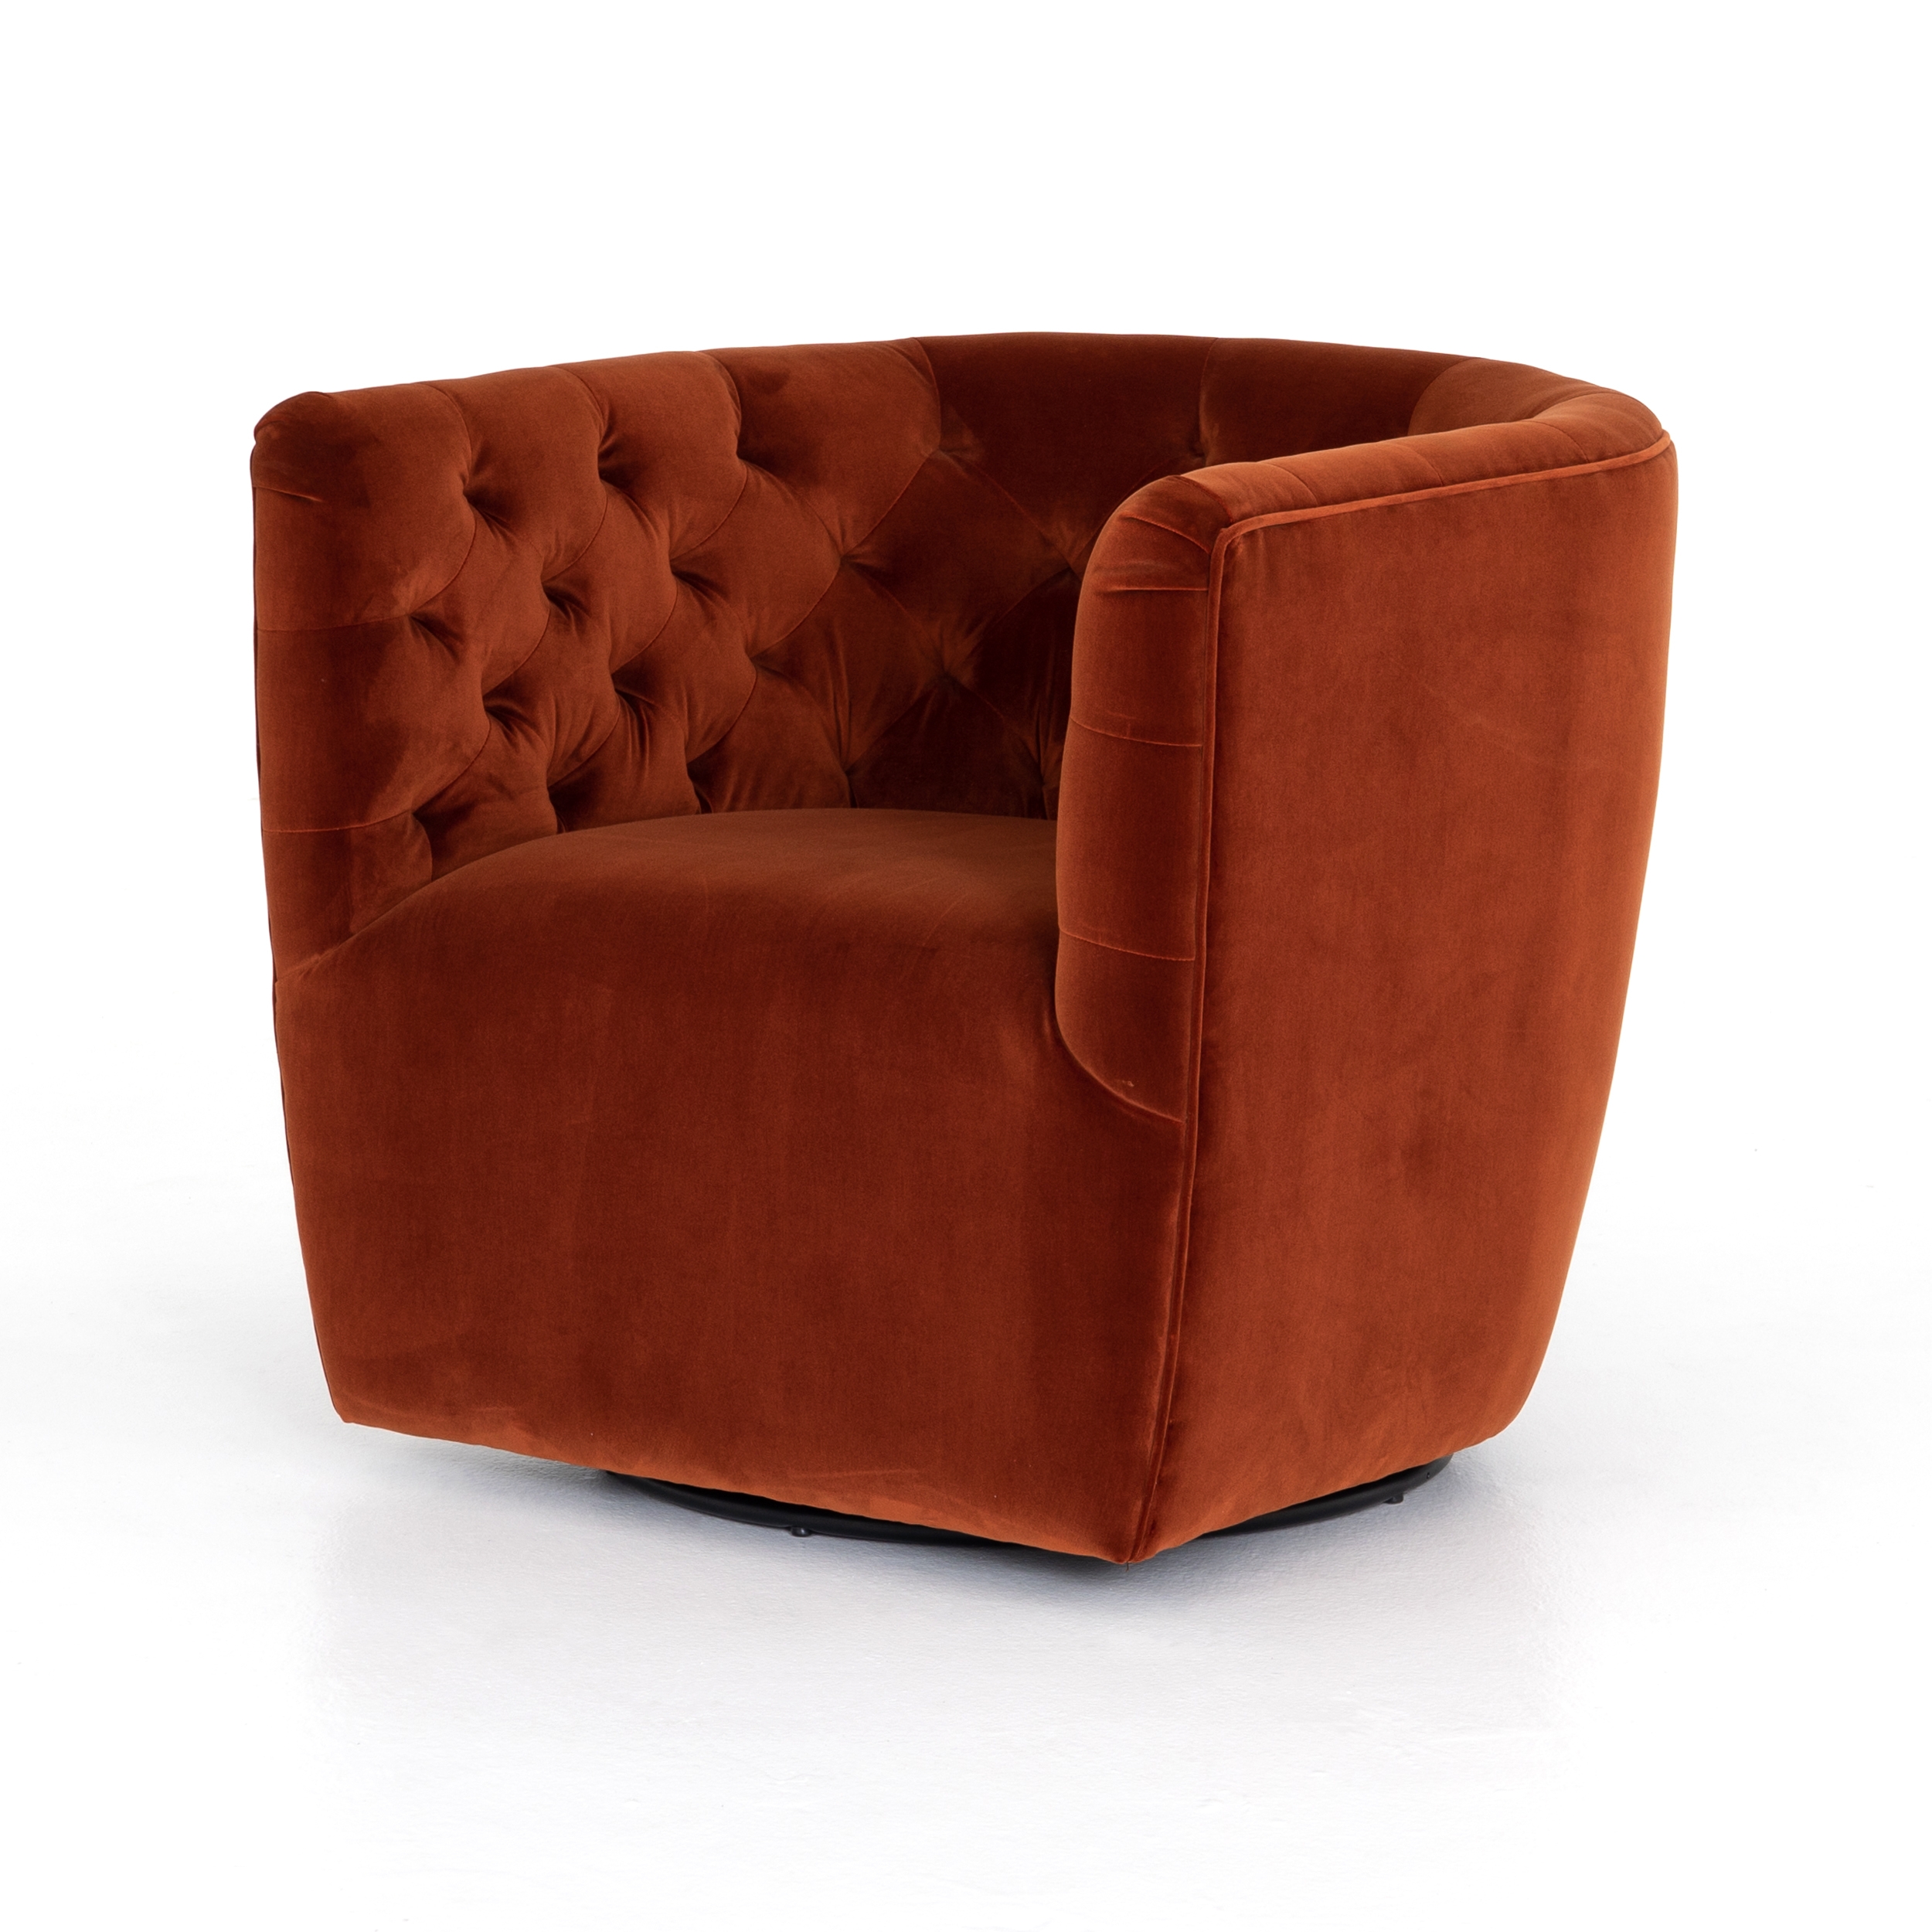 Lilith Swivel Chair - Image 1